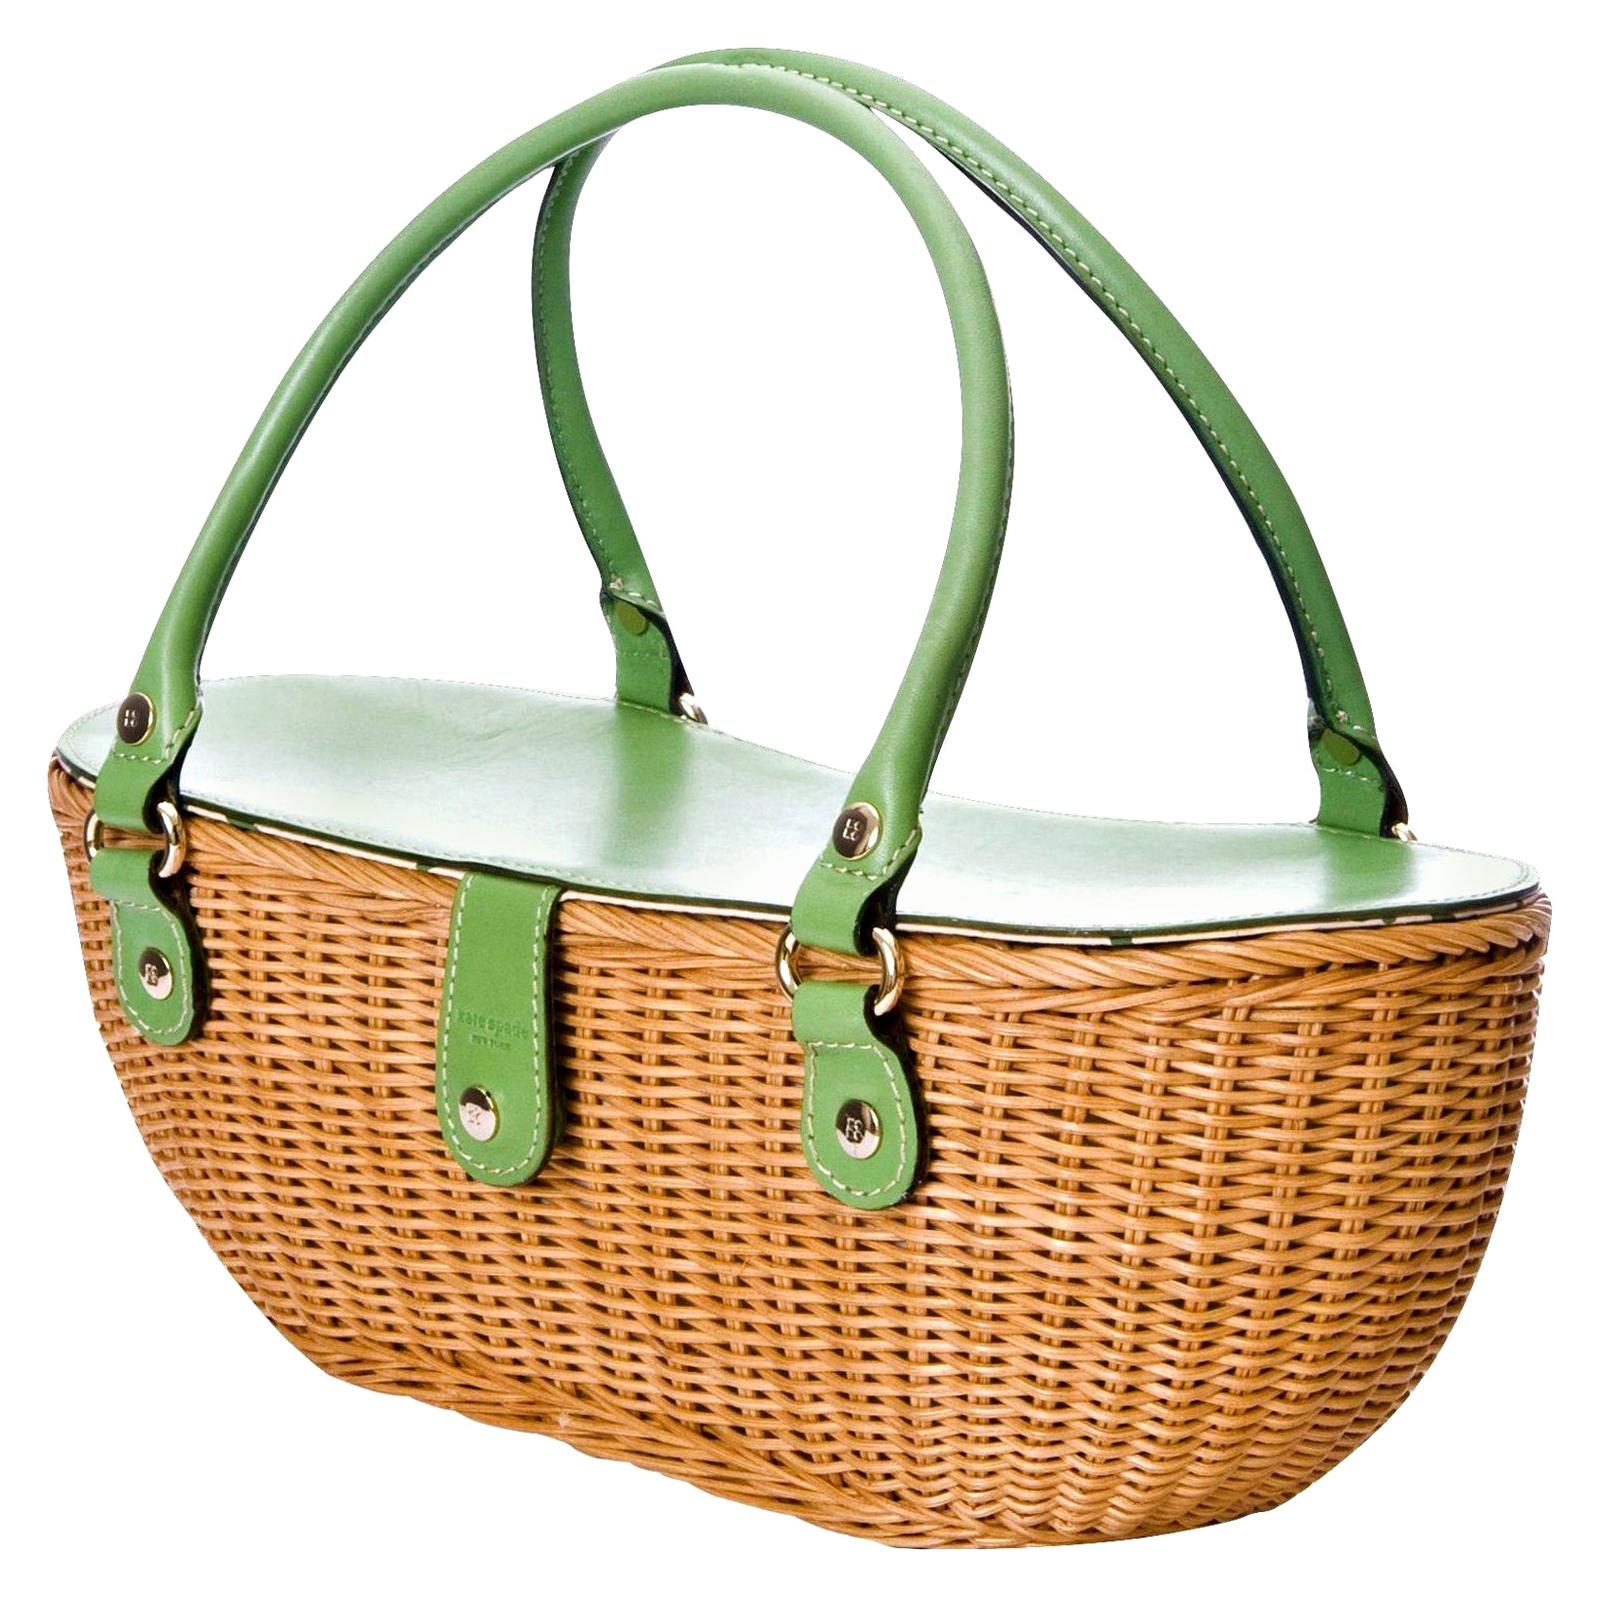 Kate Spade Wicker Bag
Rare From Her Spring 2005 Collection
DESIGNED BY KATE SPADE
This is the last collection before she sold her brand to Neiman Marcus
Impossible to Find Brand New
* Beautiful Lacquered Woven Wicker
* Gold Hardware
* One Interior